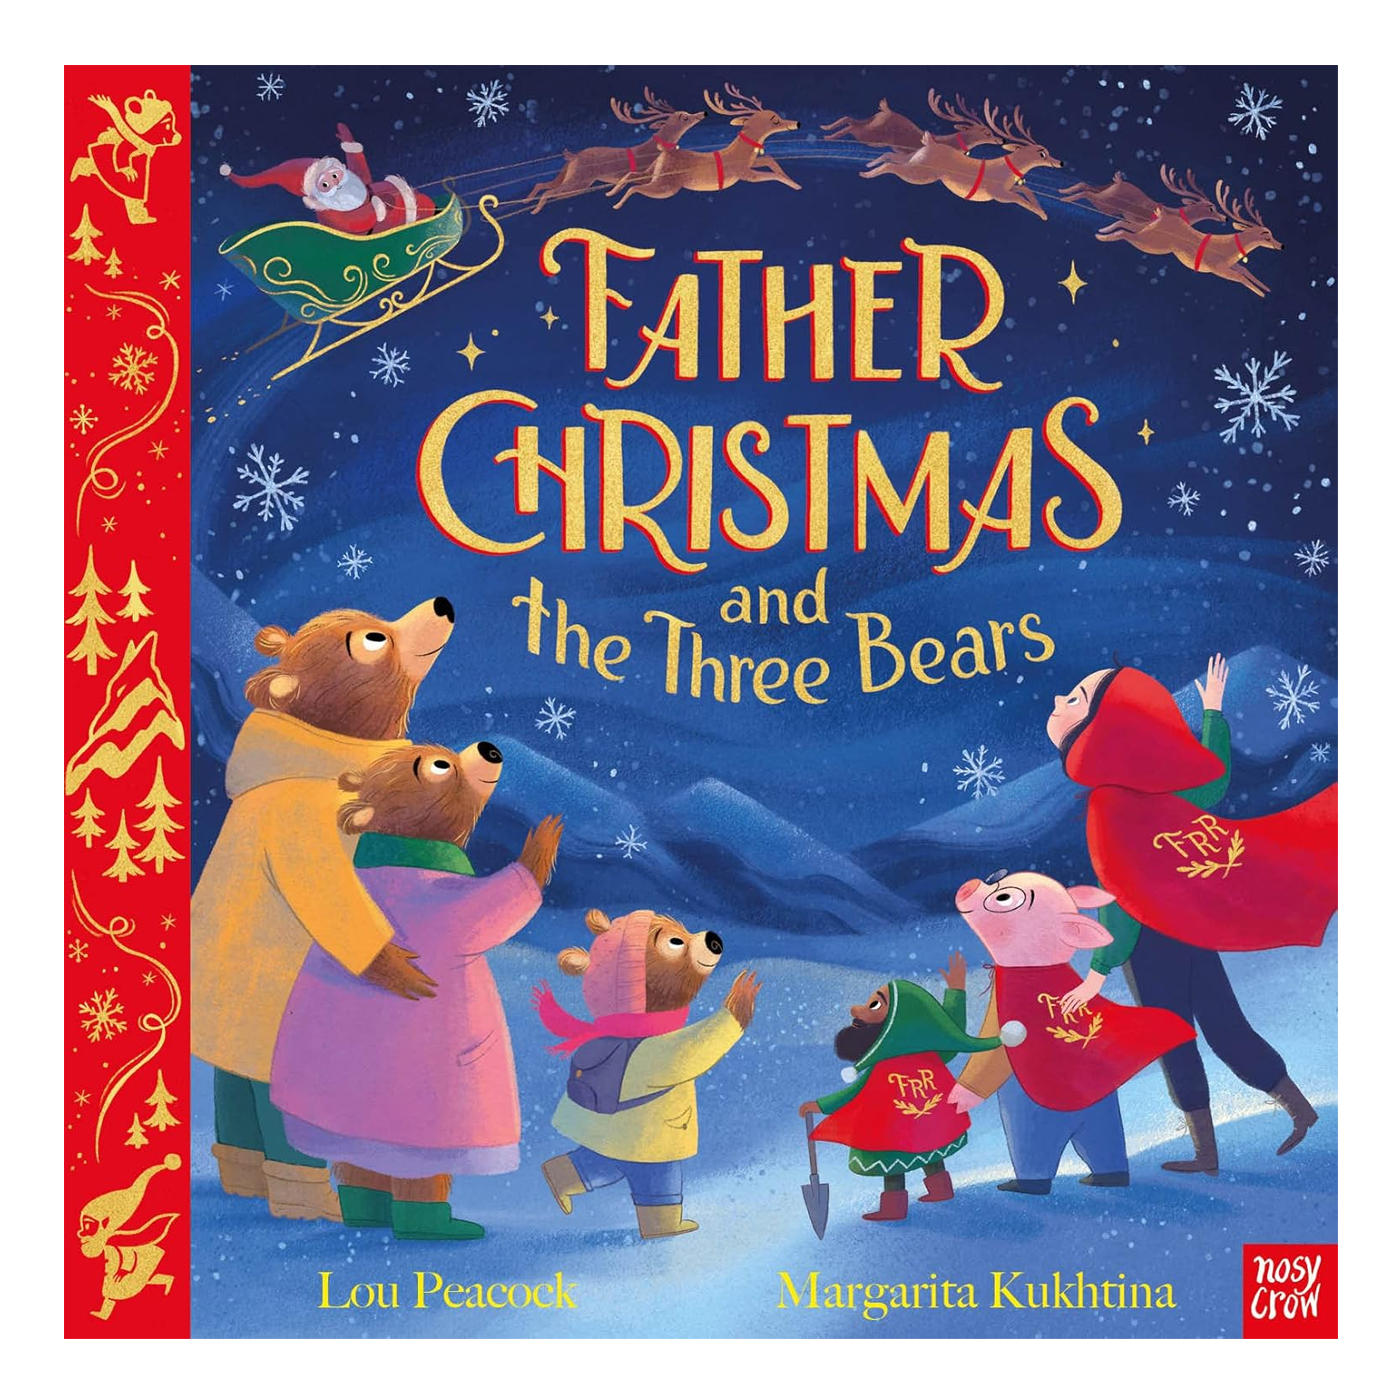  Father Christmas and the Three Bears